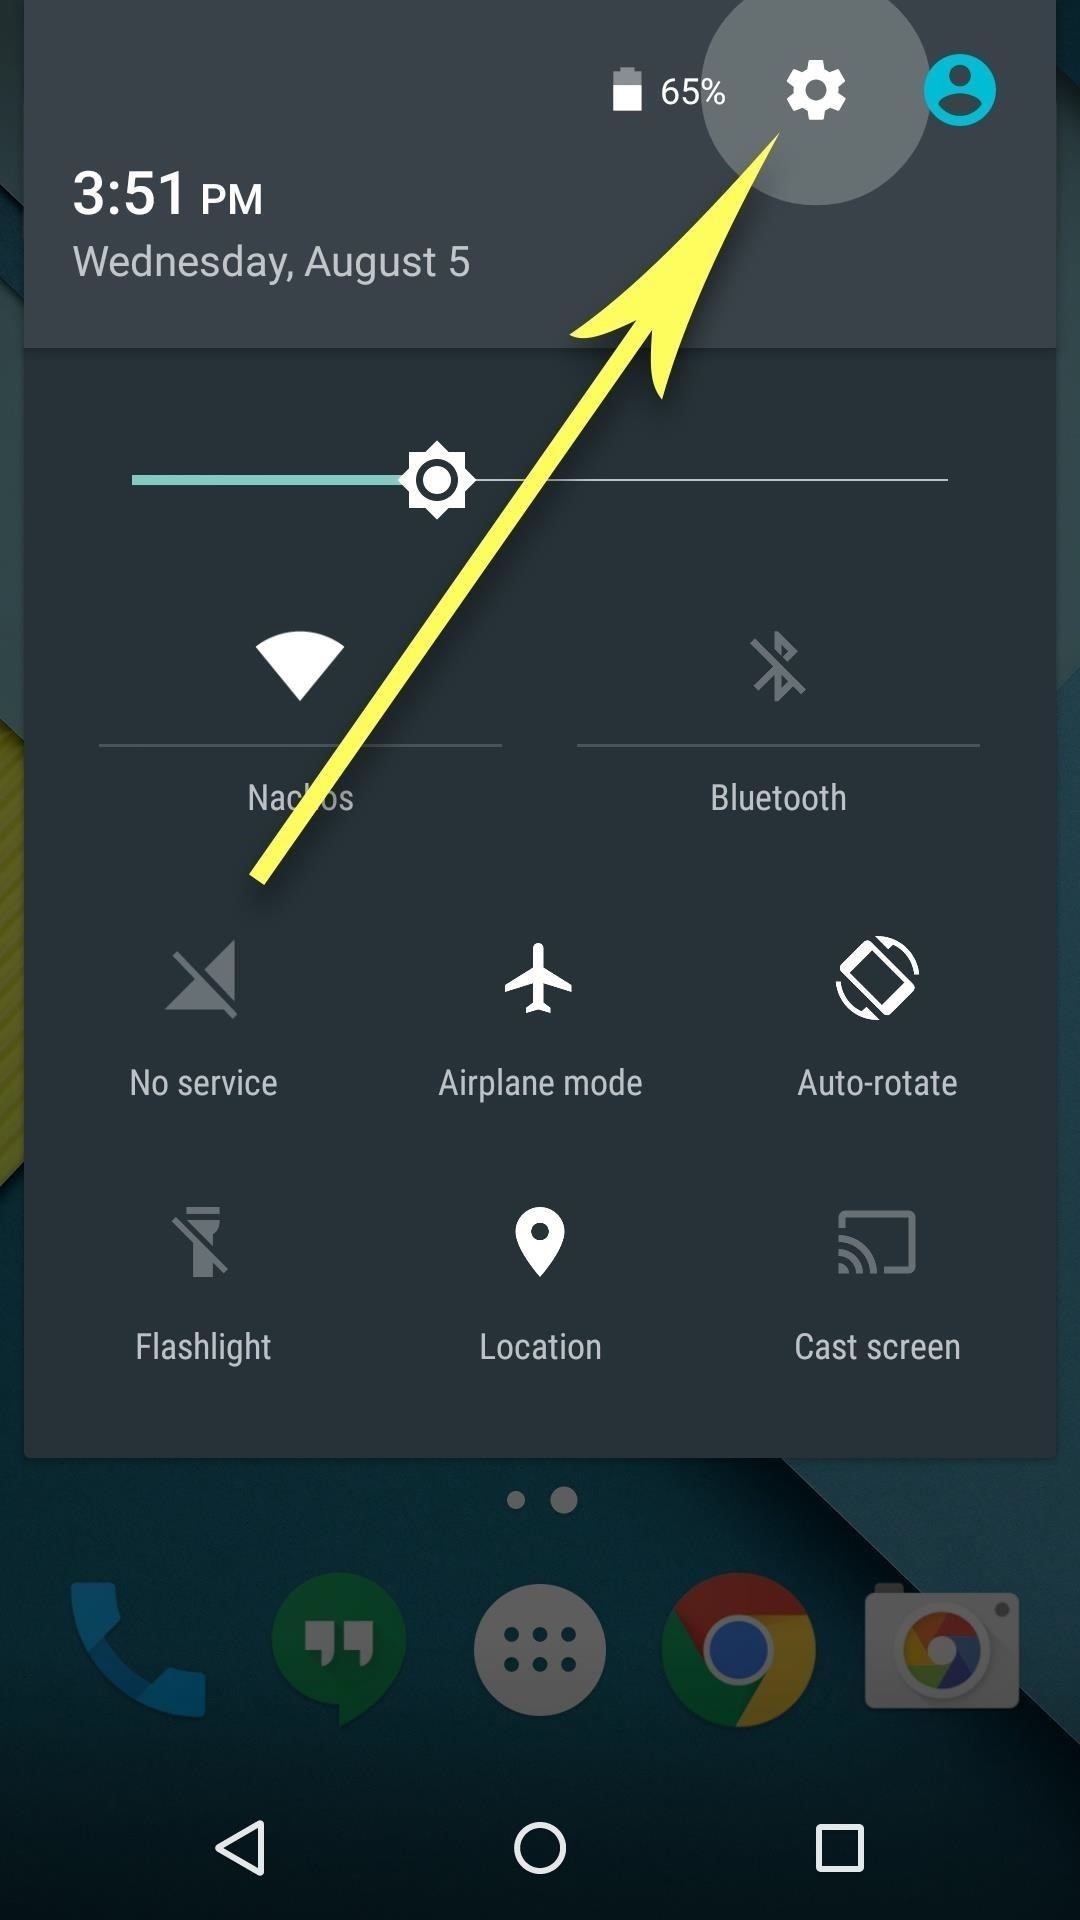 Android Basics: How to Connect to a Bluetooth Device